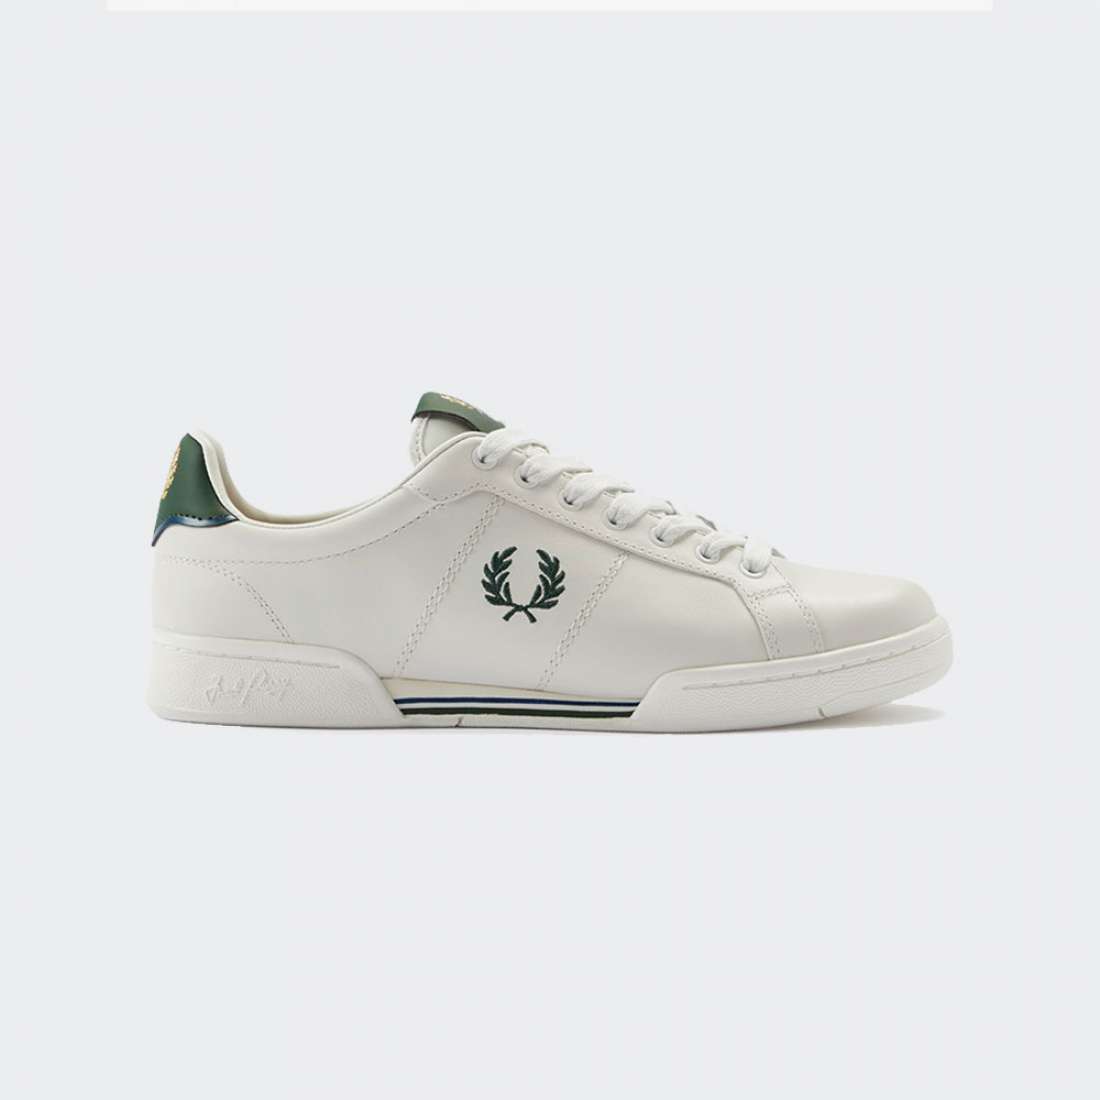 FRED PERRY B722 172